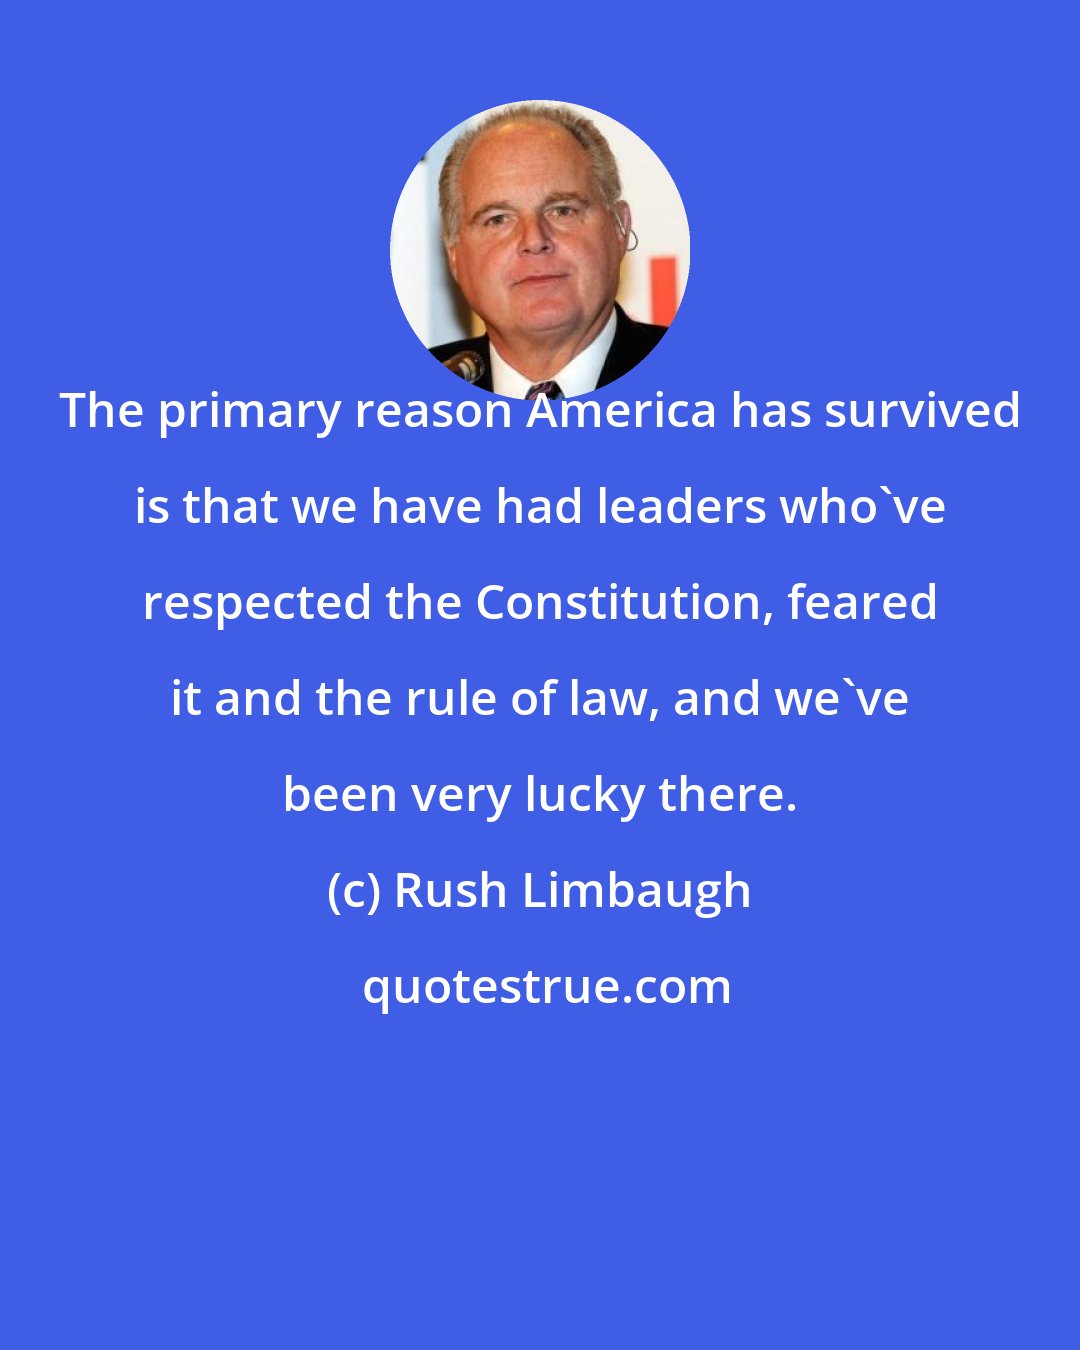 Rush Limbaugh: The primary reason America has survived is that we have had leaders who've respected the Constitution, feared it and the rule of law, and we've been very lucky there.